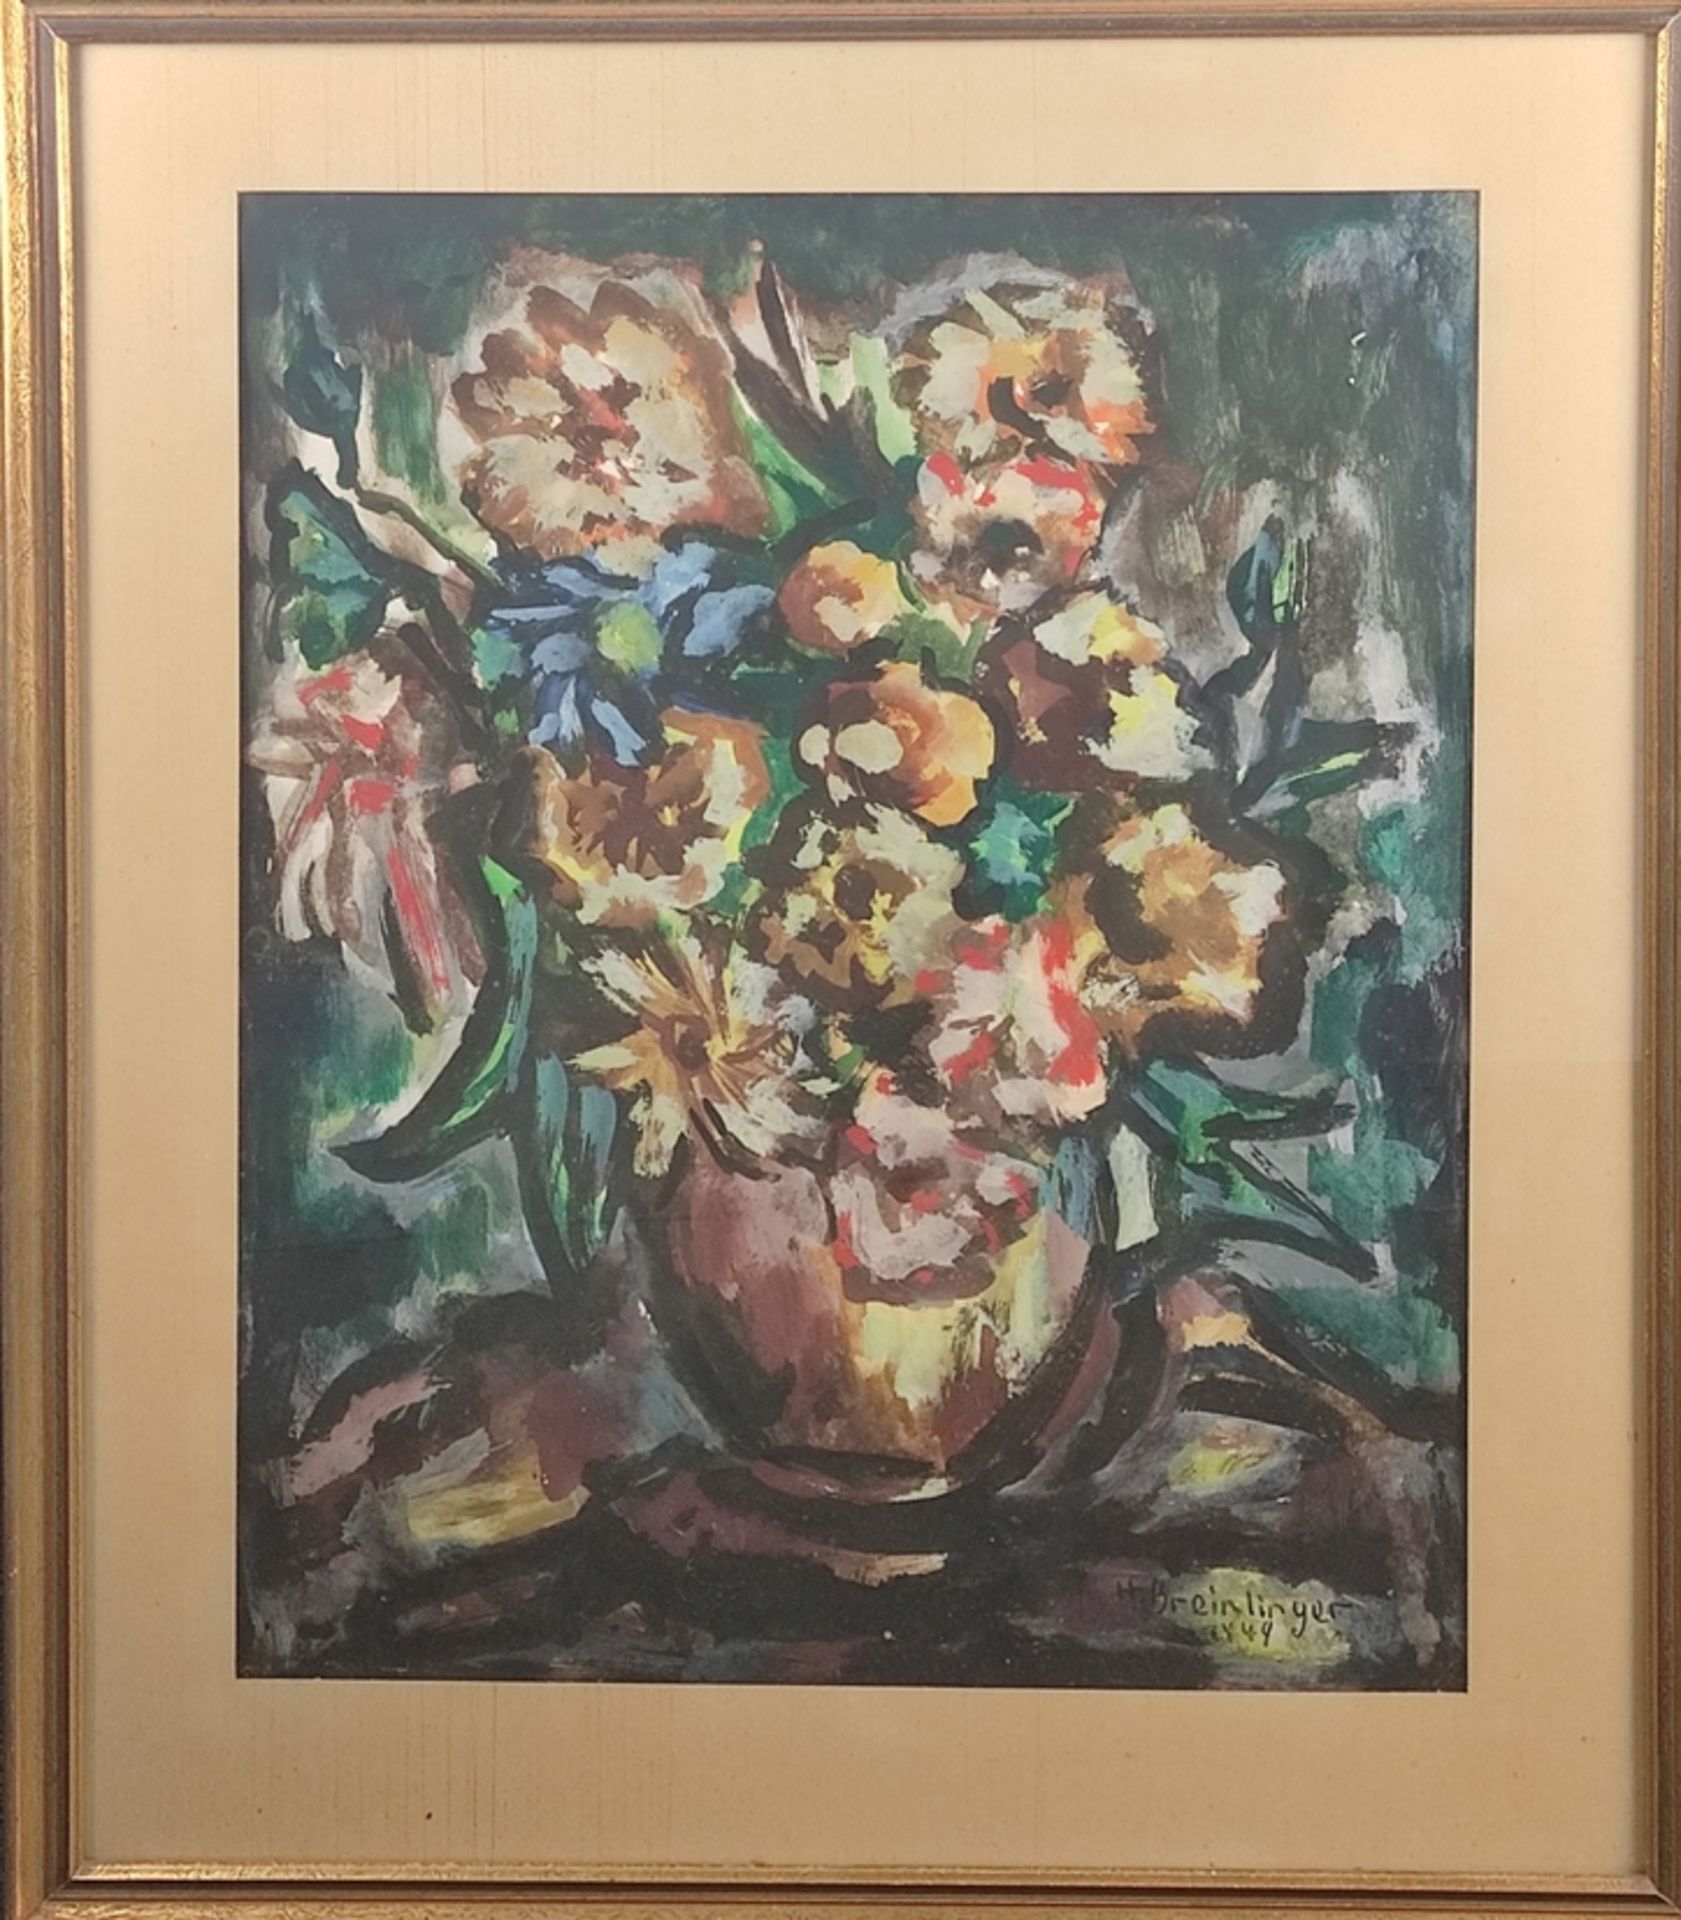 Breinlinger, Hans (1888 - 1963 Constance) "Flower Still Life", spring-like bouquet in strong colors - Image 2 of 3